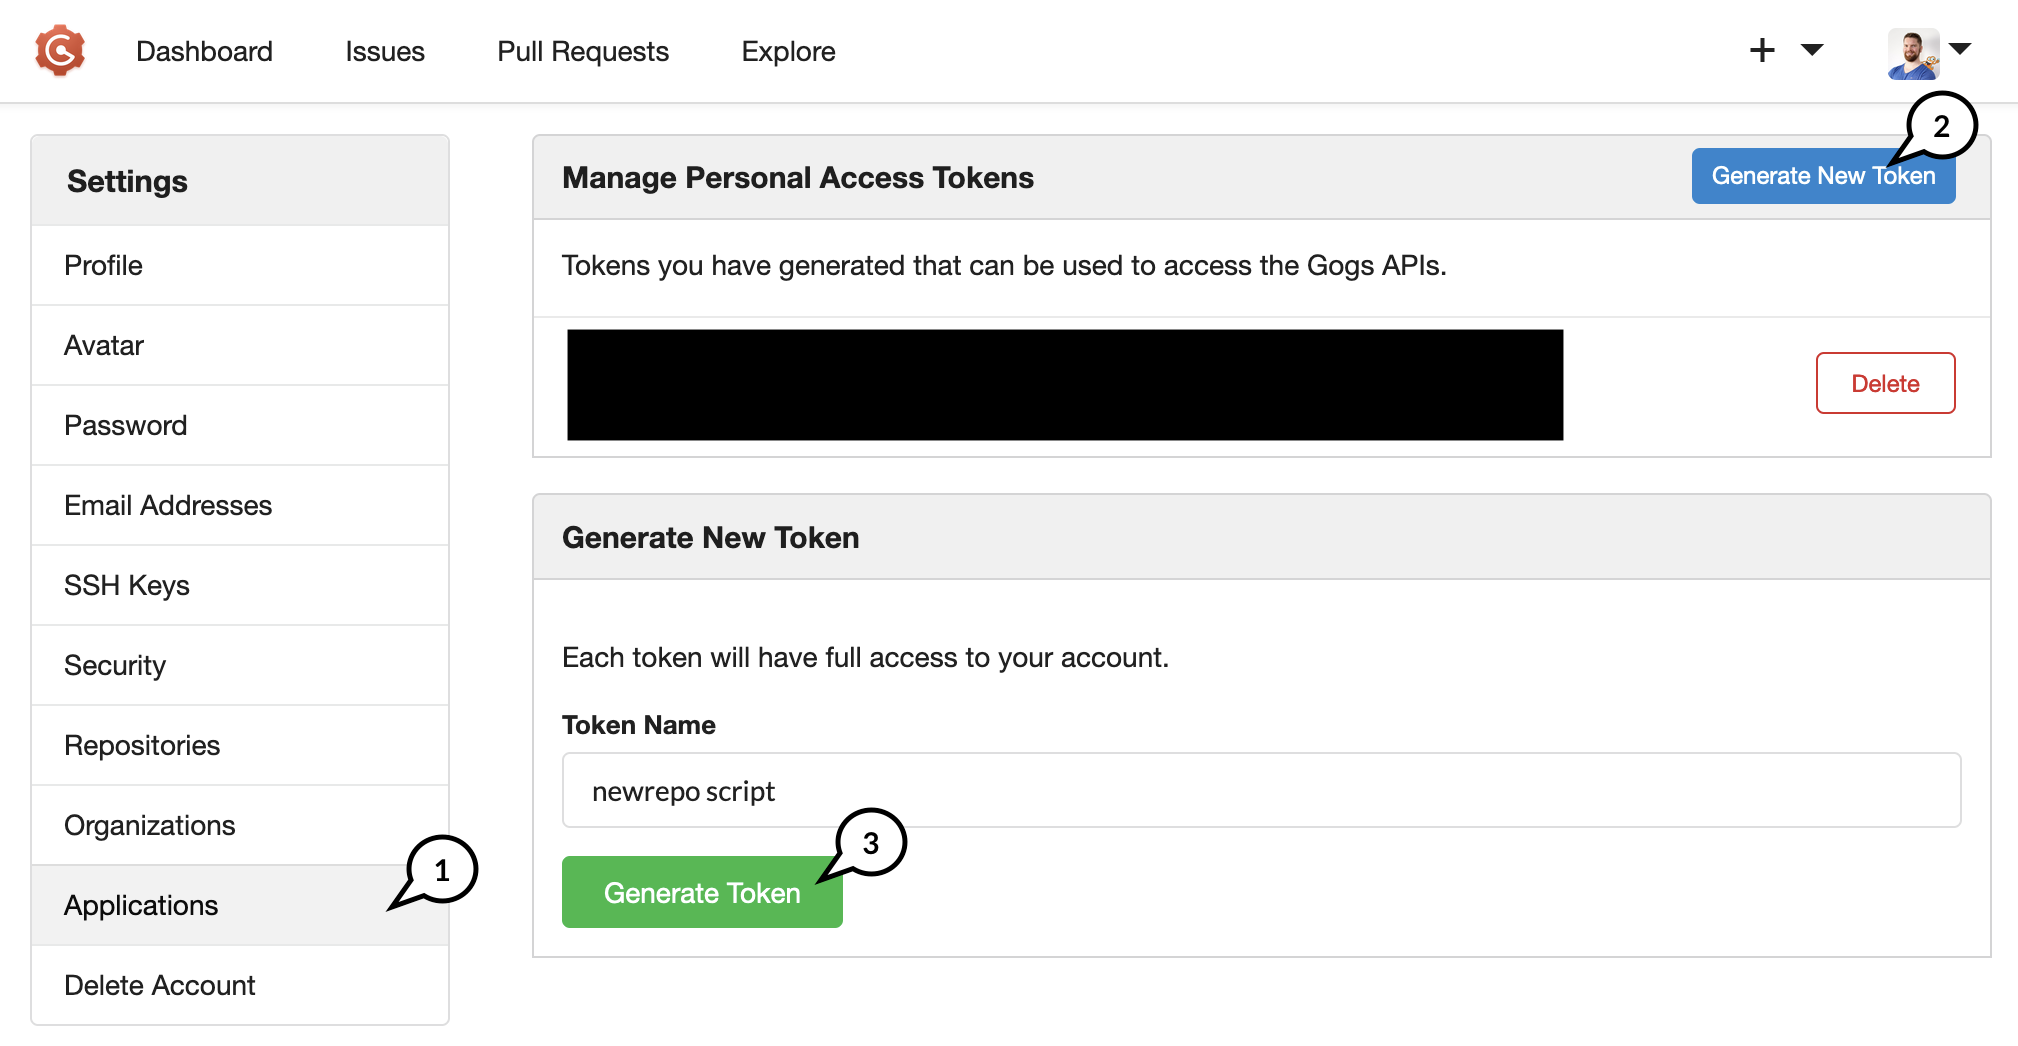 Screenshot of Gogs UI with Applications-Settings open. User is able to enter a Token Name and click on a &ldquo;Generate New Token&rdquo; button.